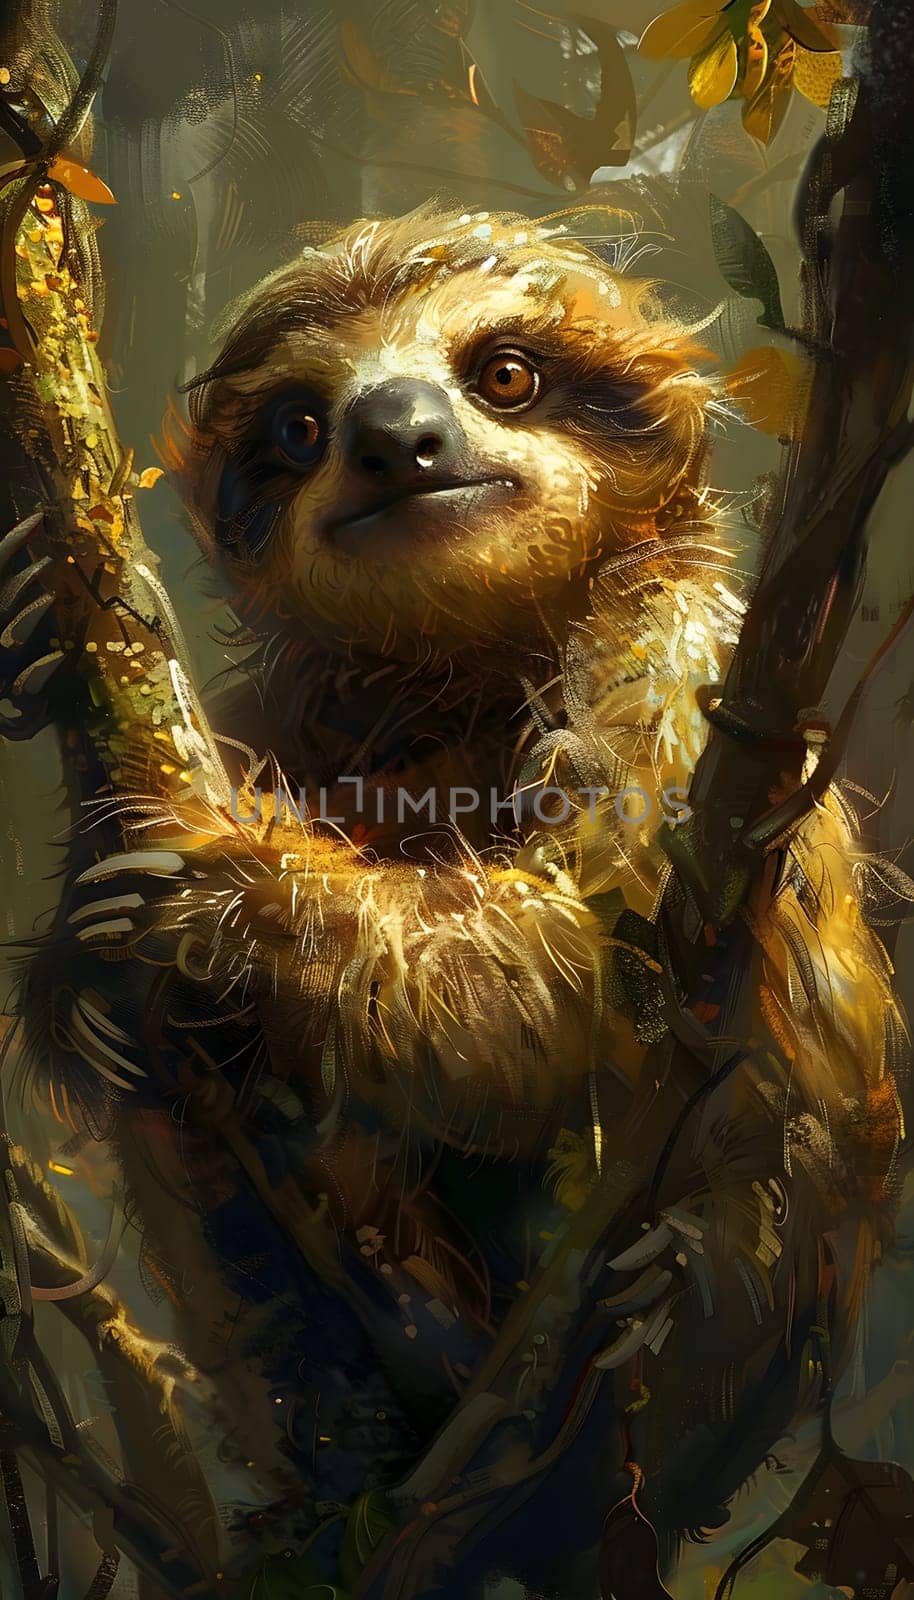 A threetoed sloth is depicted hanging from a tree branch in a jungle painting, showcasing its terrestrial animal characteristics and fur